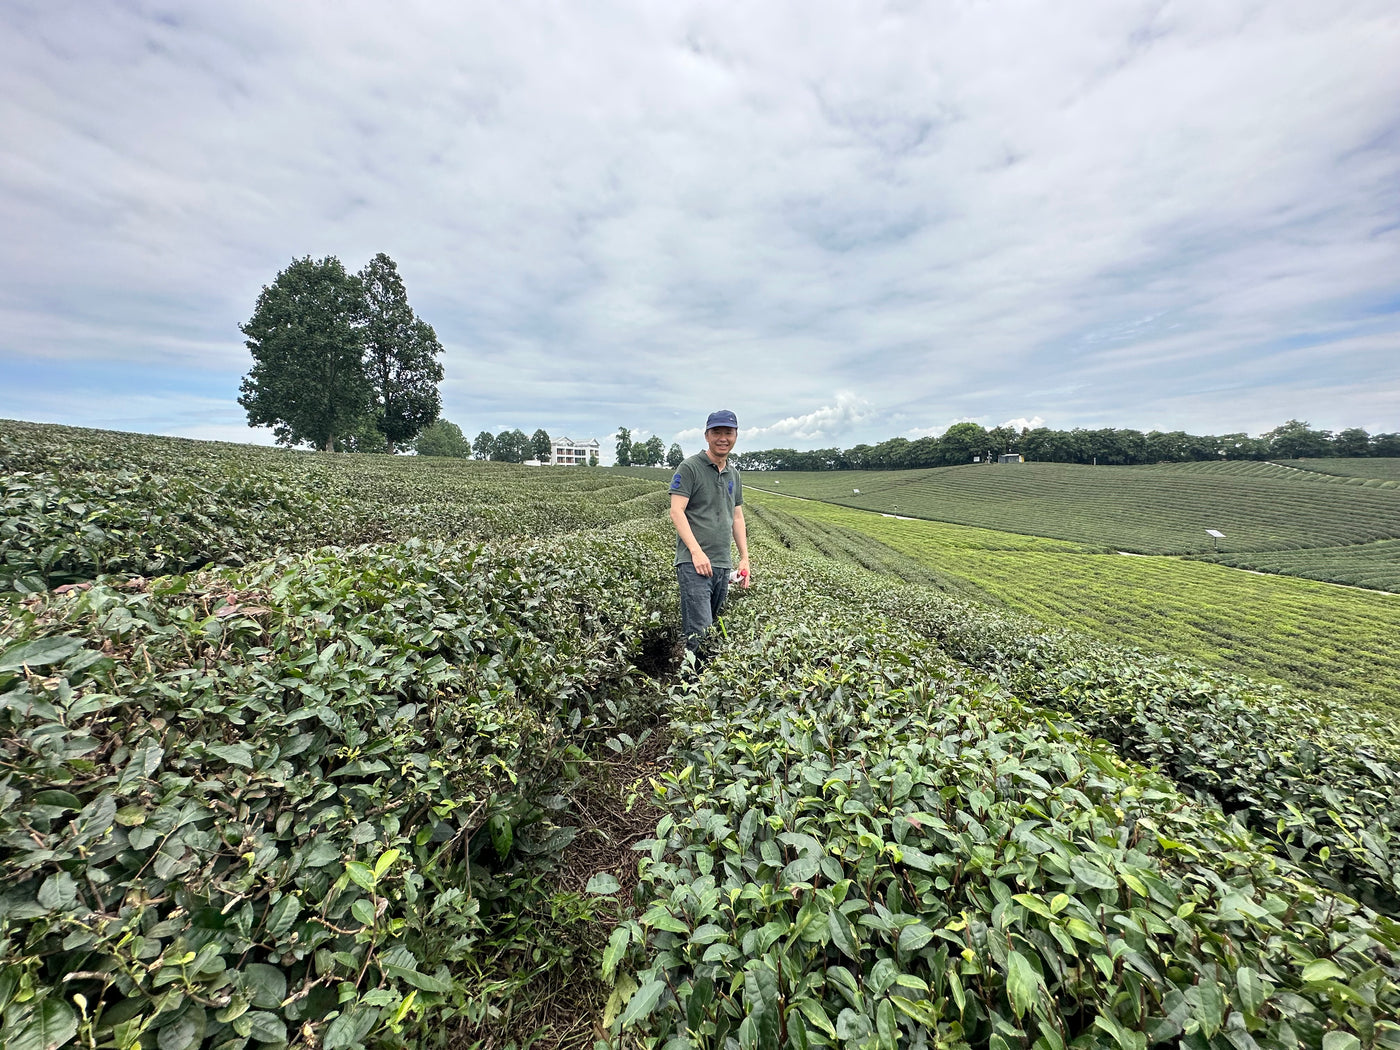 Tea estate owner standing in a field of tea in China's Zhejiang province.